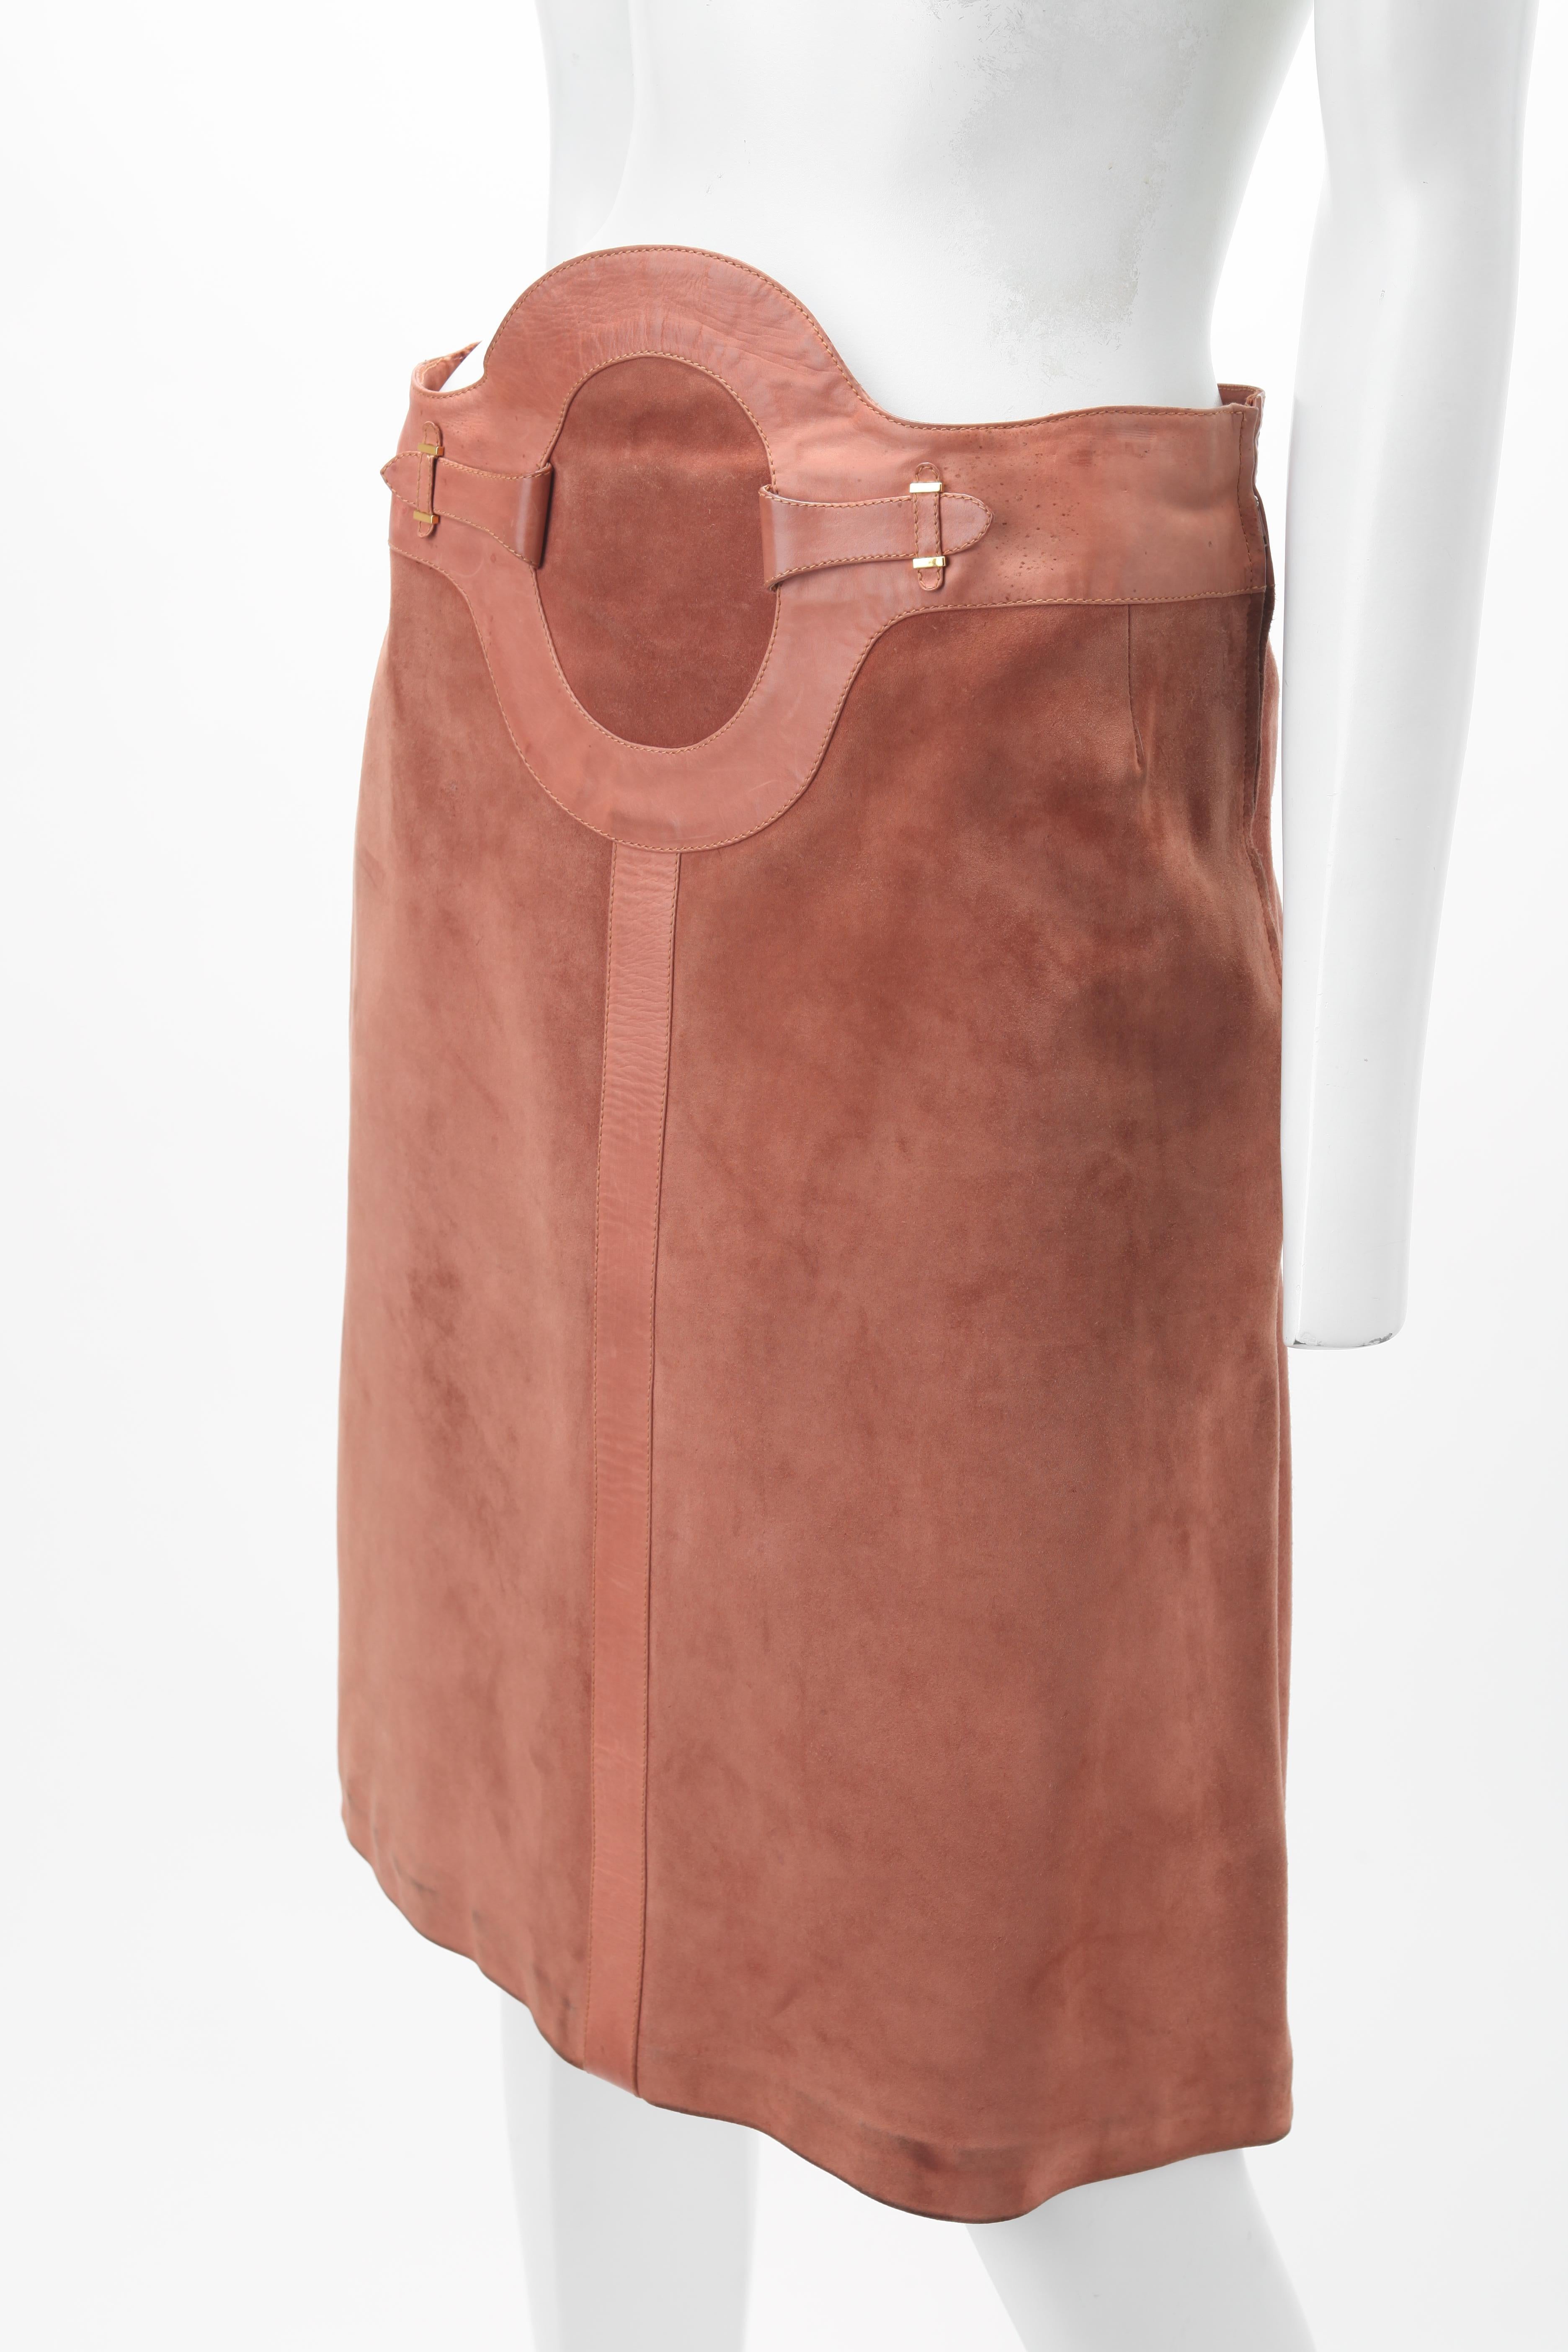 c.1970s Archival GUCCI Camel Suede A-Line Skirt In Good Condition For Sale In New York, NY